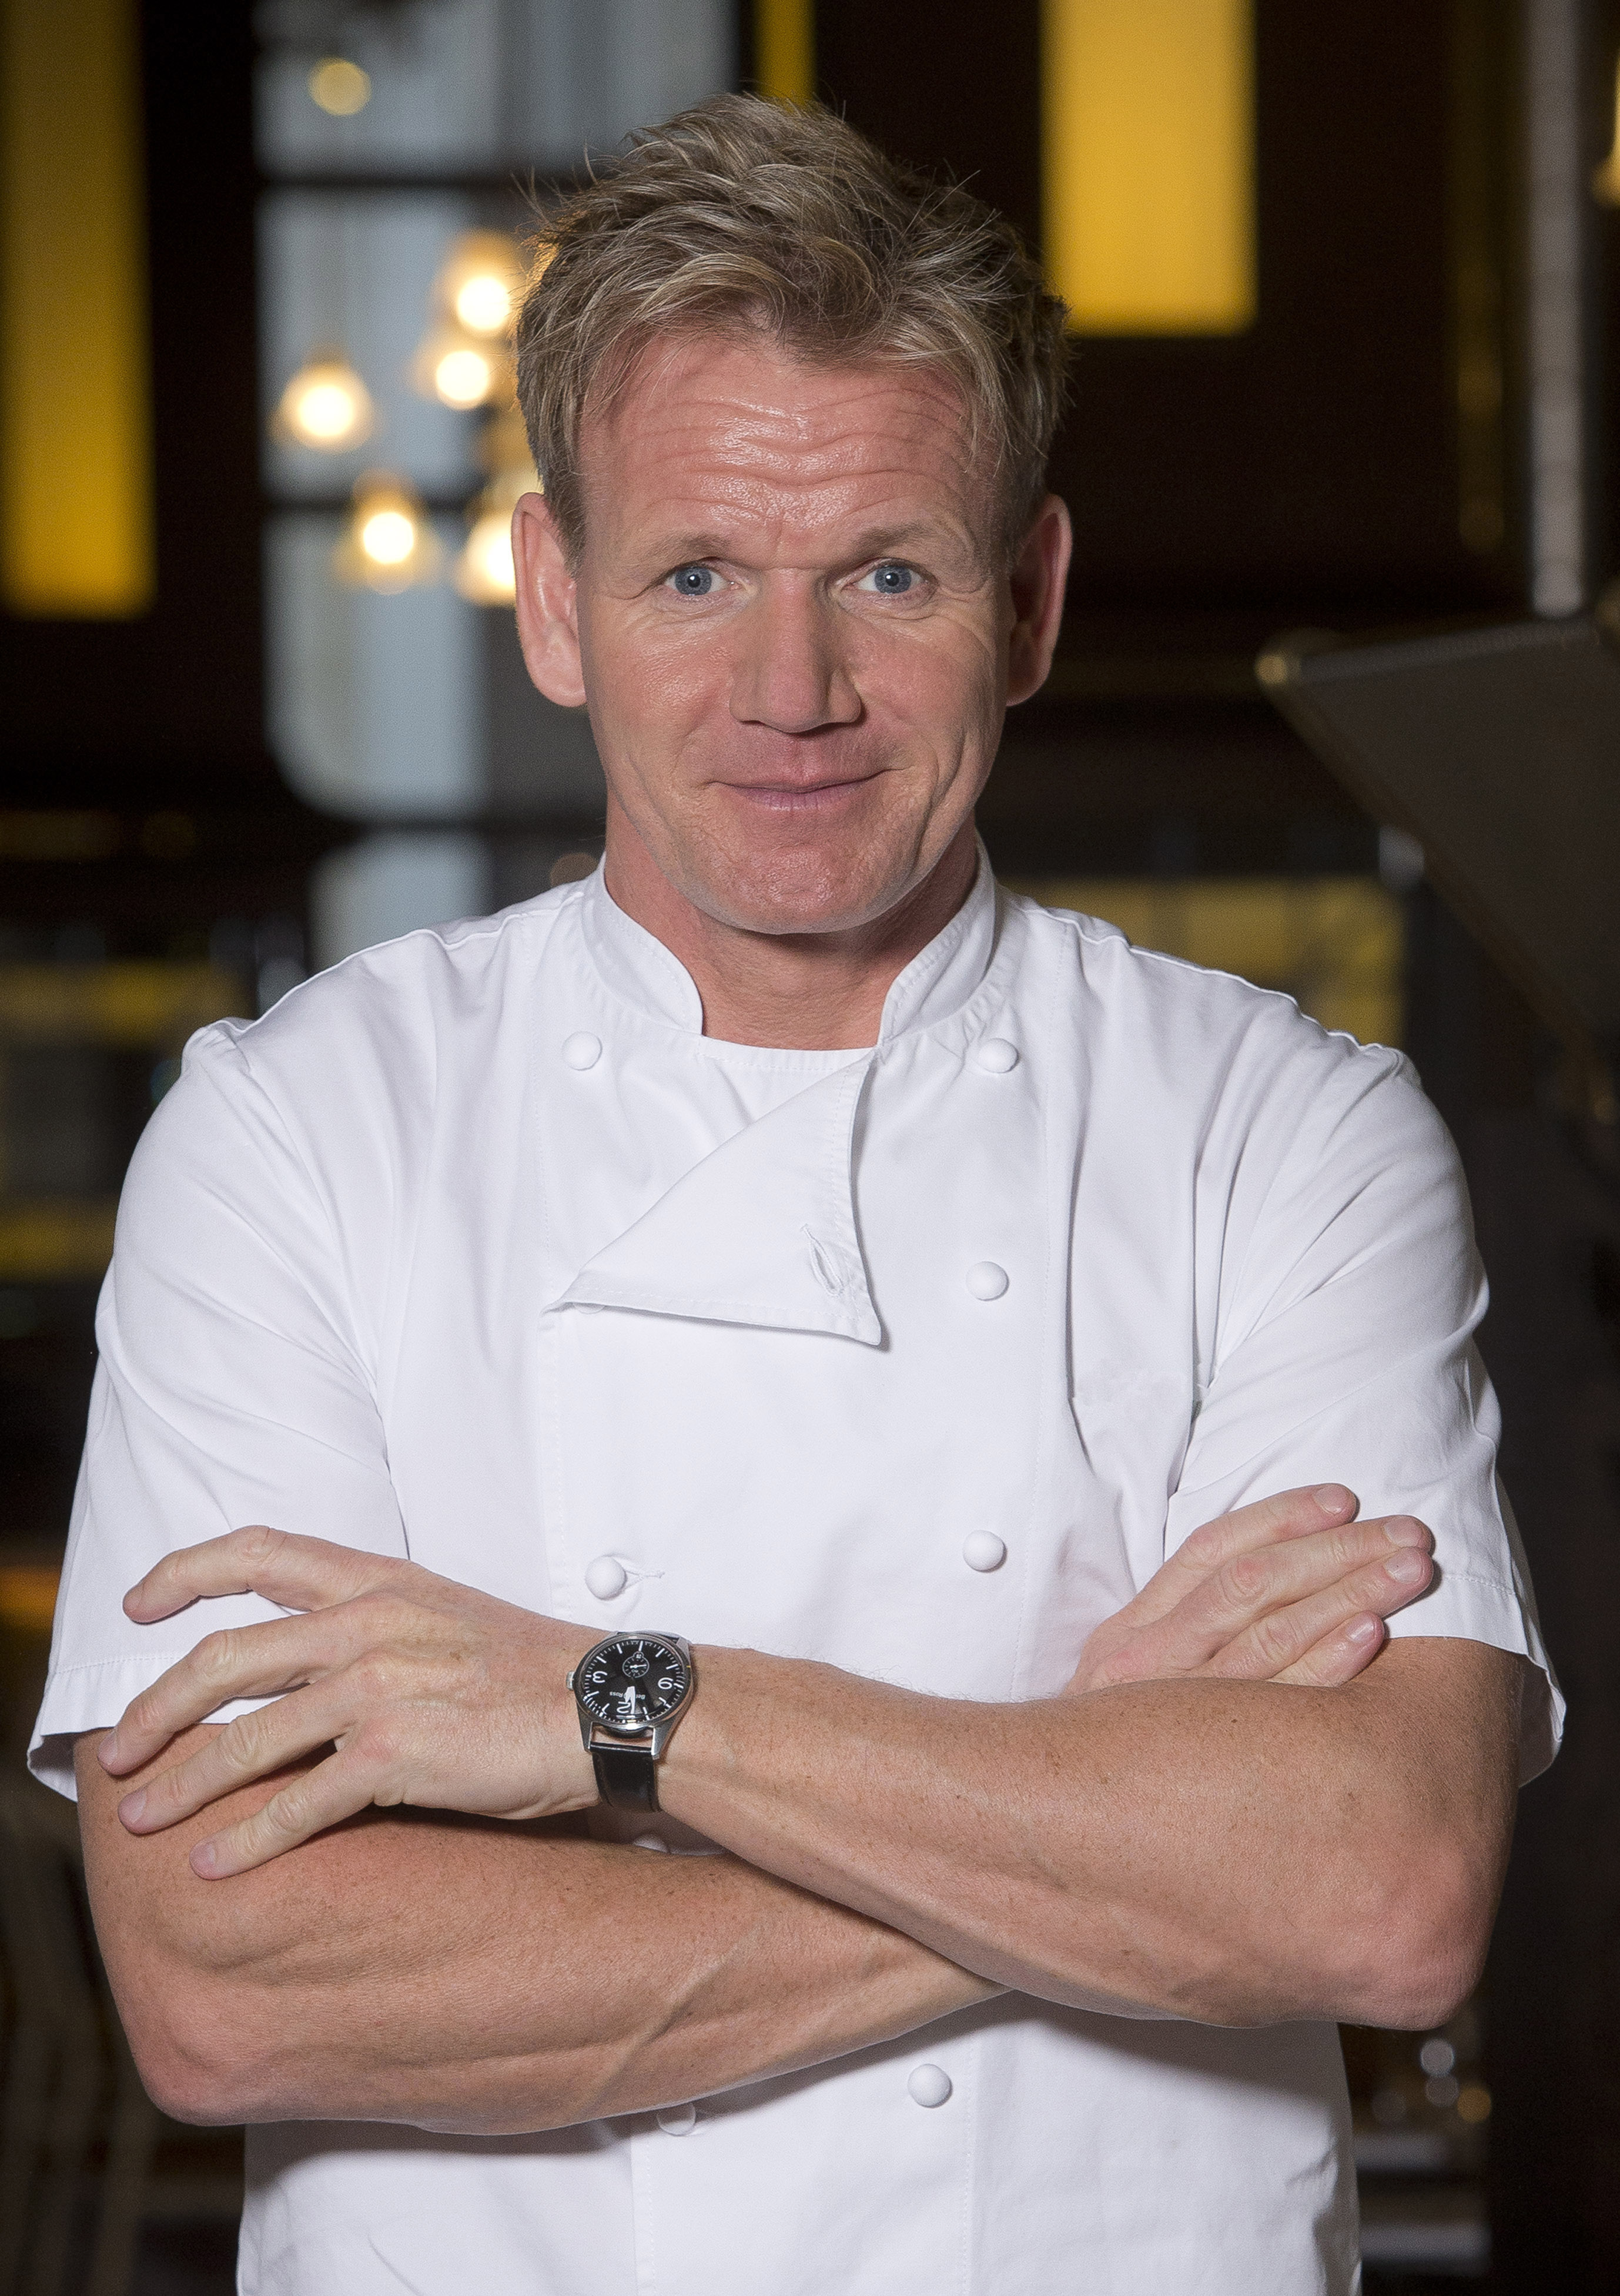 30 Unknown Facts About The World Famous Celebrity Chef – Gordon Ramsay ...